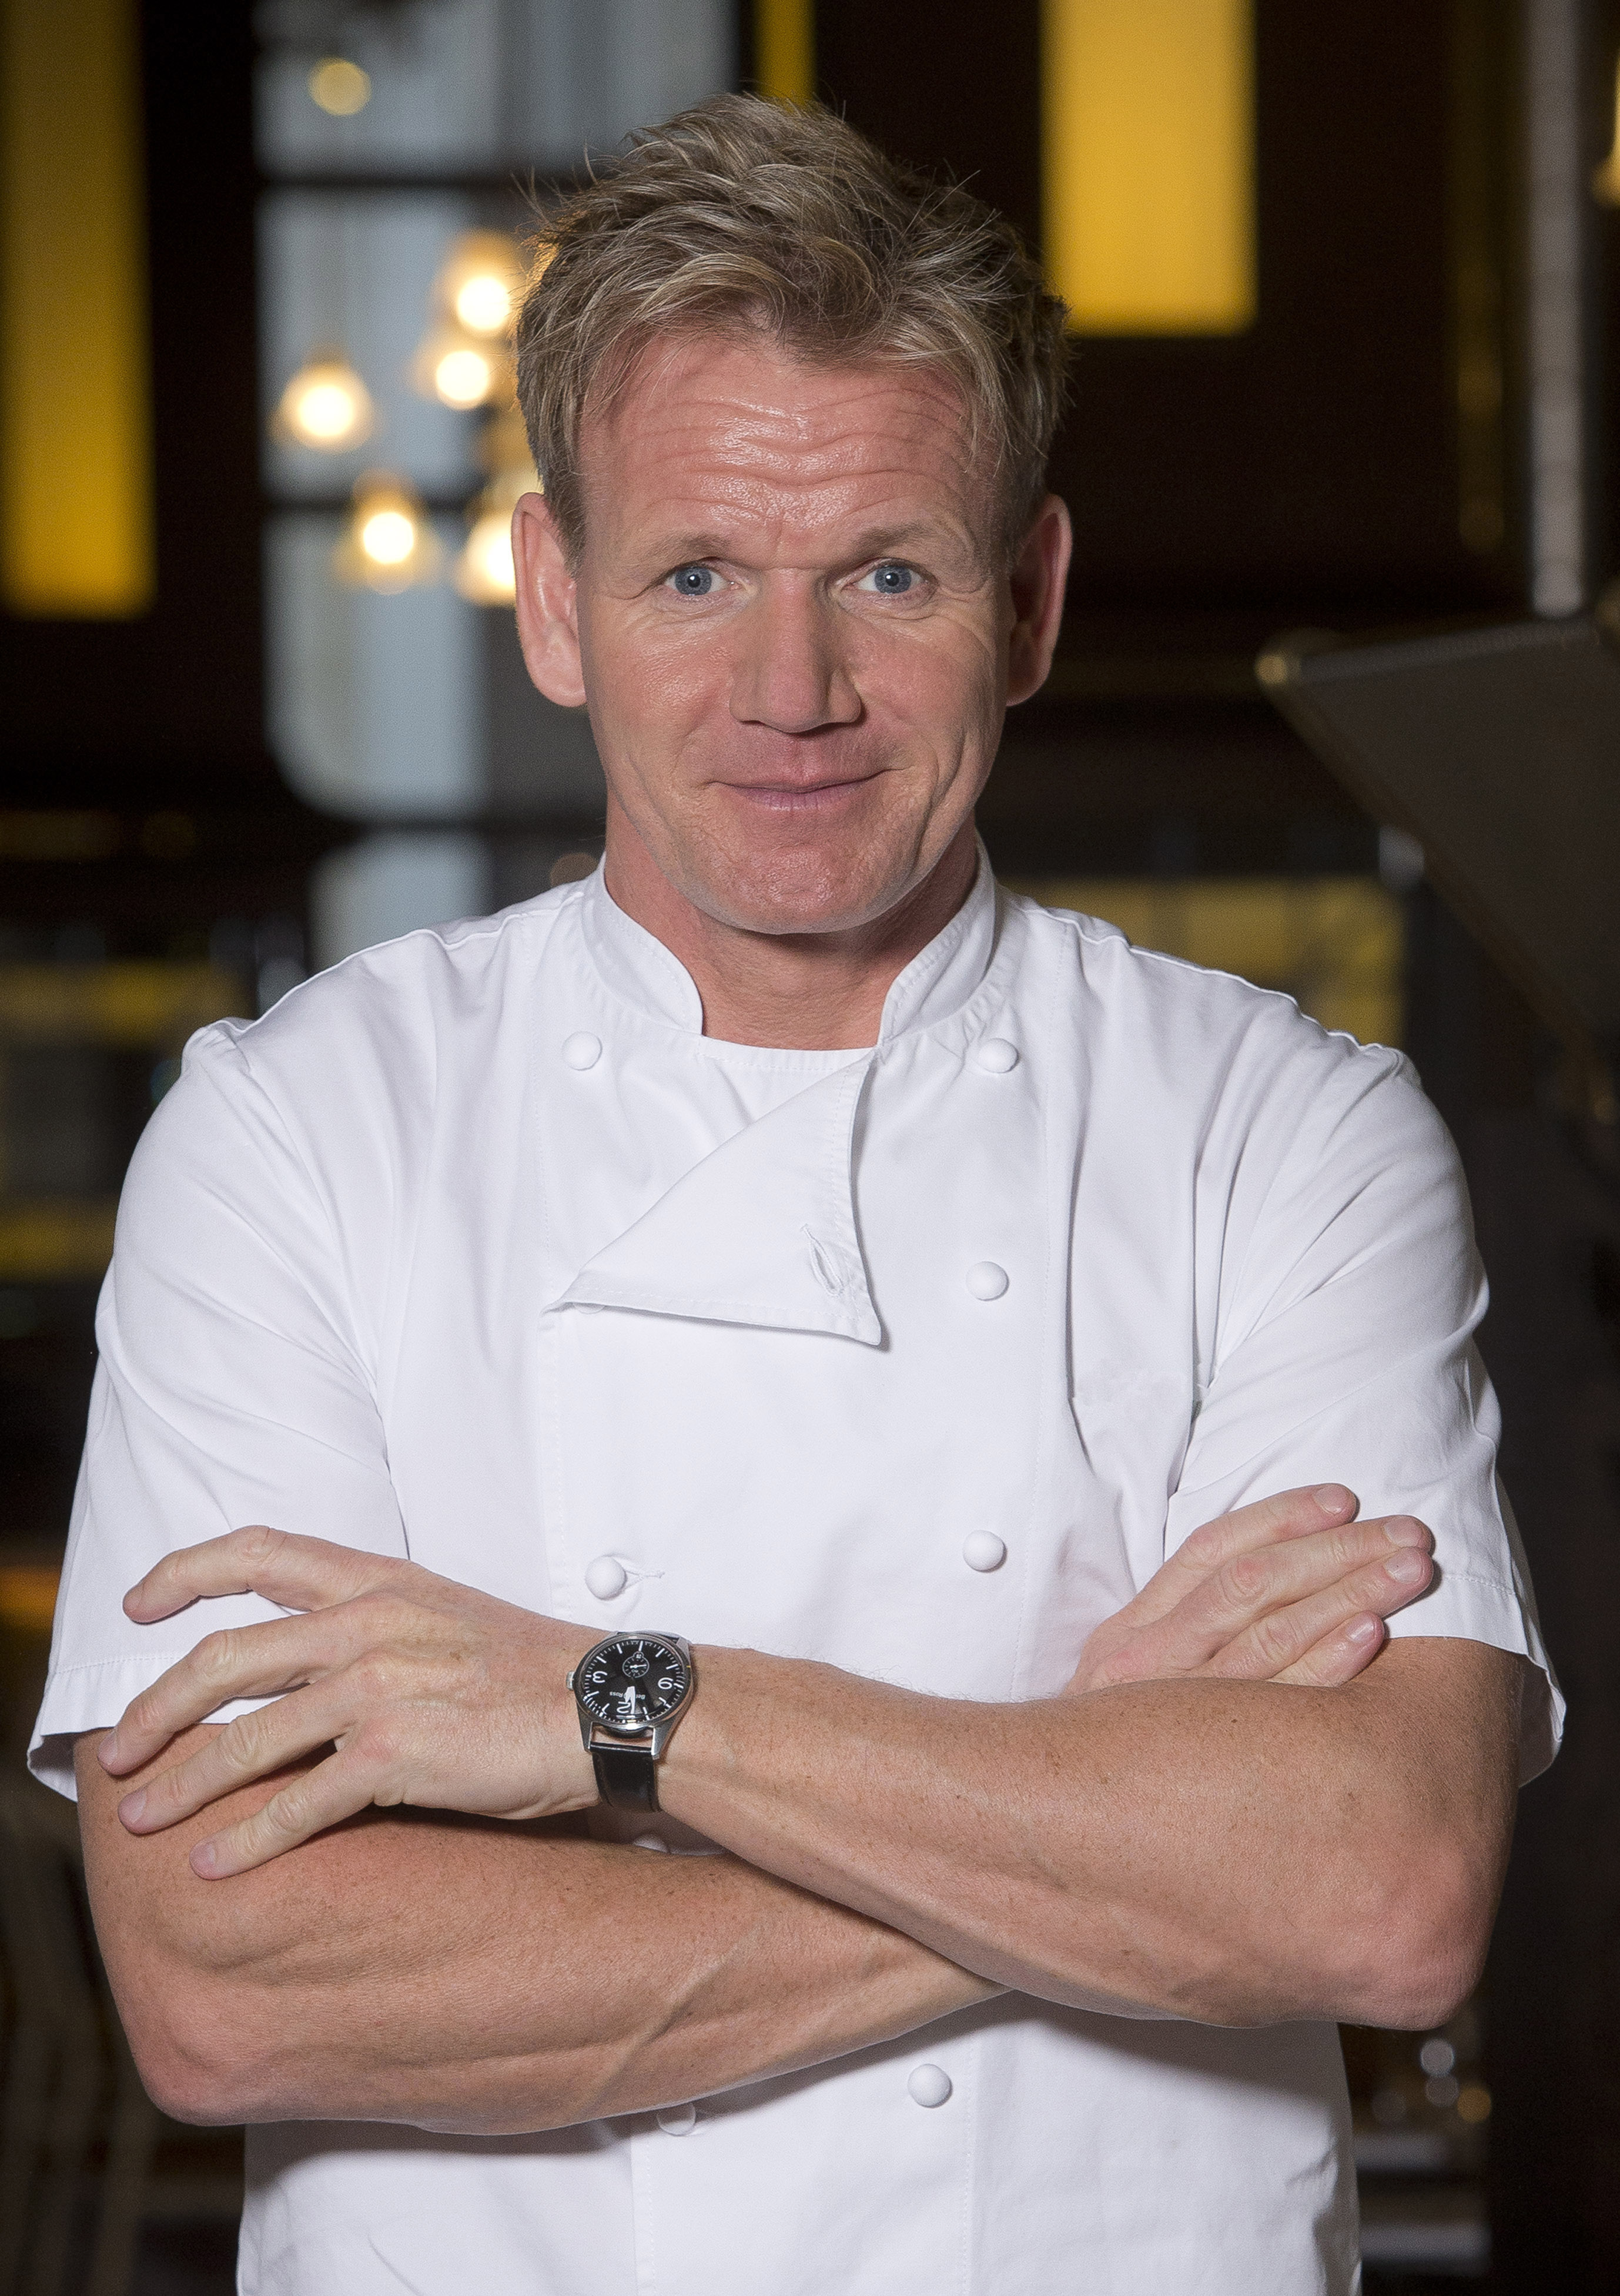 30 Unknown Facts About The World Famous Celebrity Chef – Gordon Ramsay ...